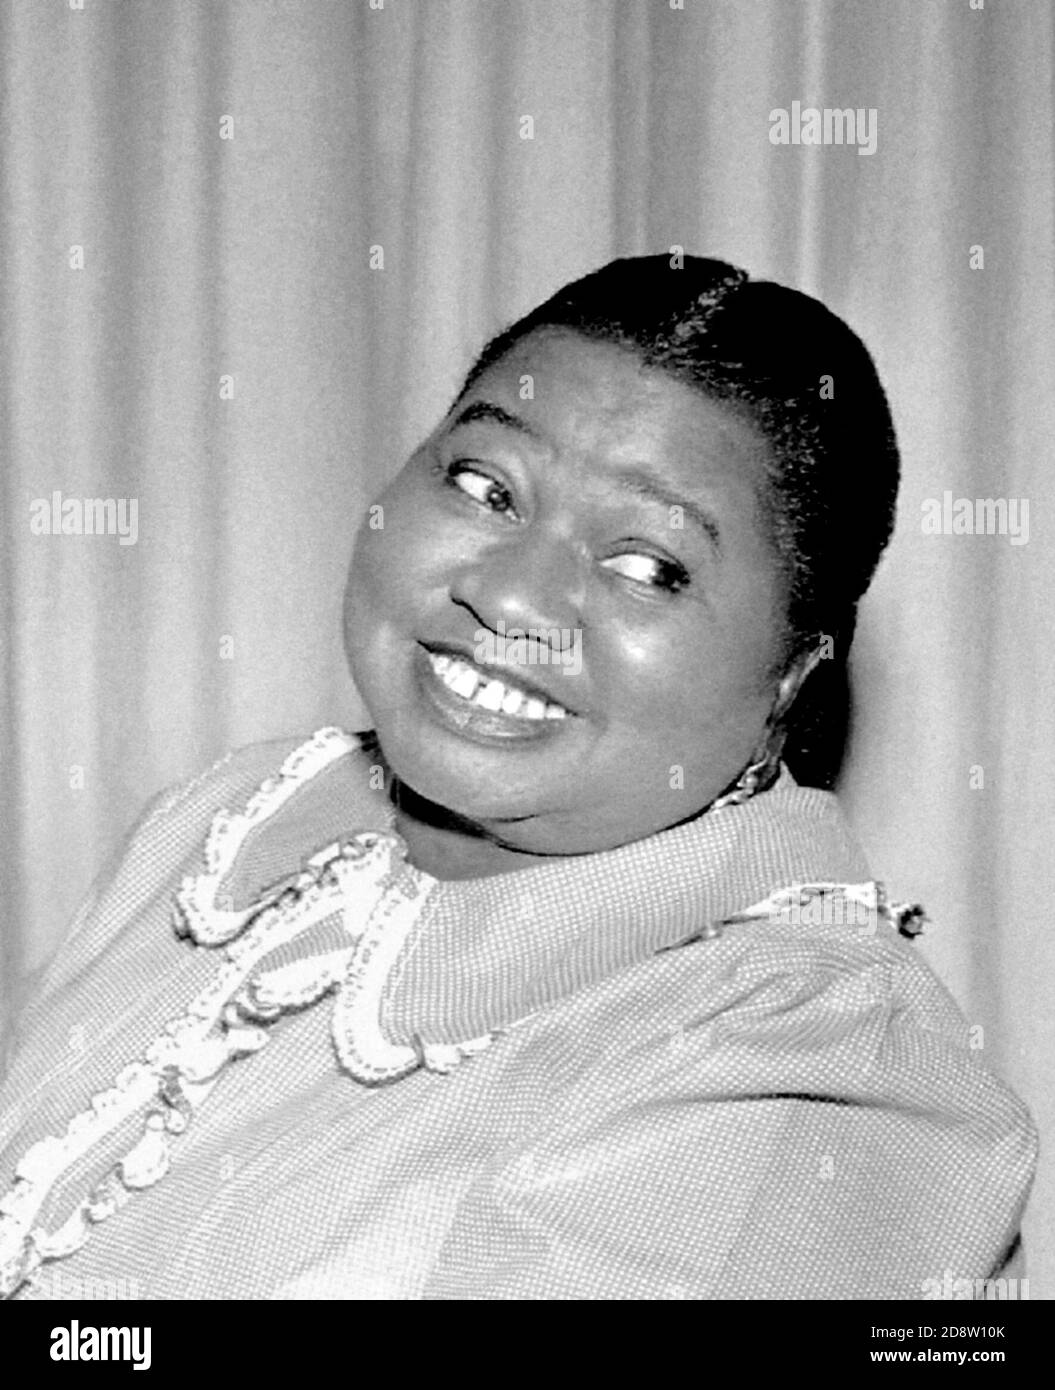 Hattie McDaniel as Beulah in the US Radio and TV series of the same name, 1951 Stock Photo